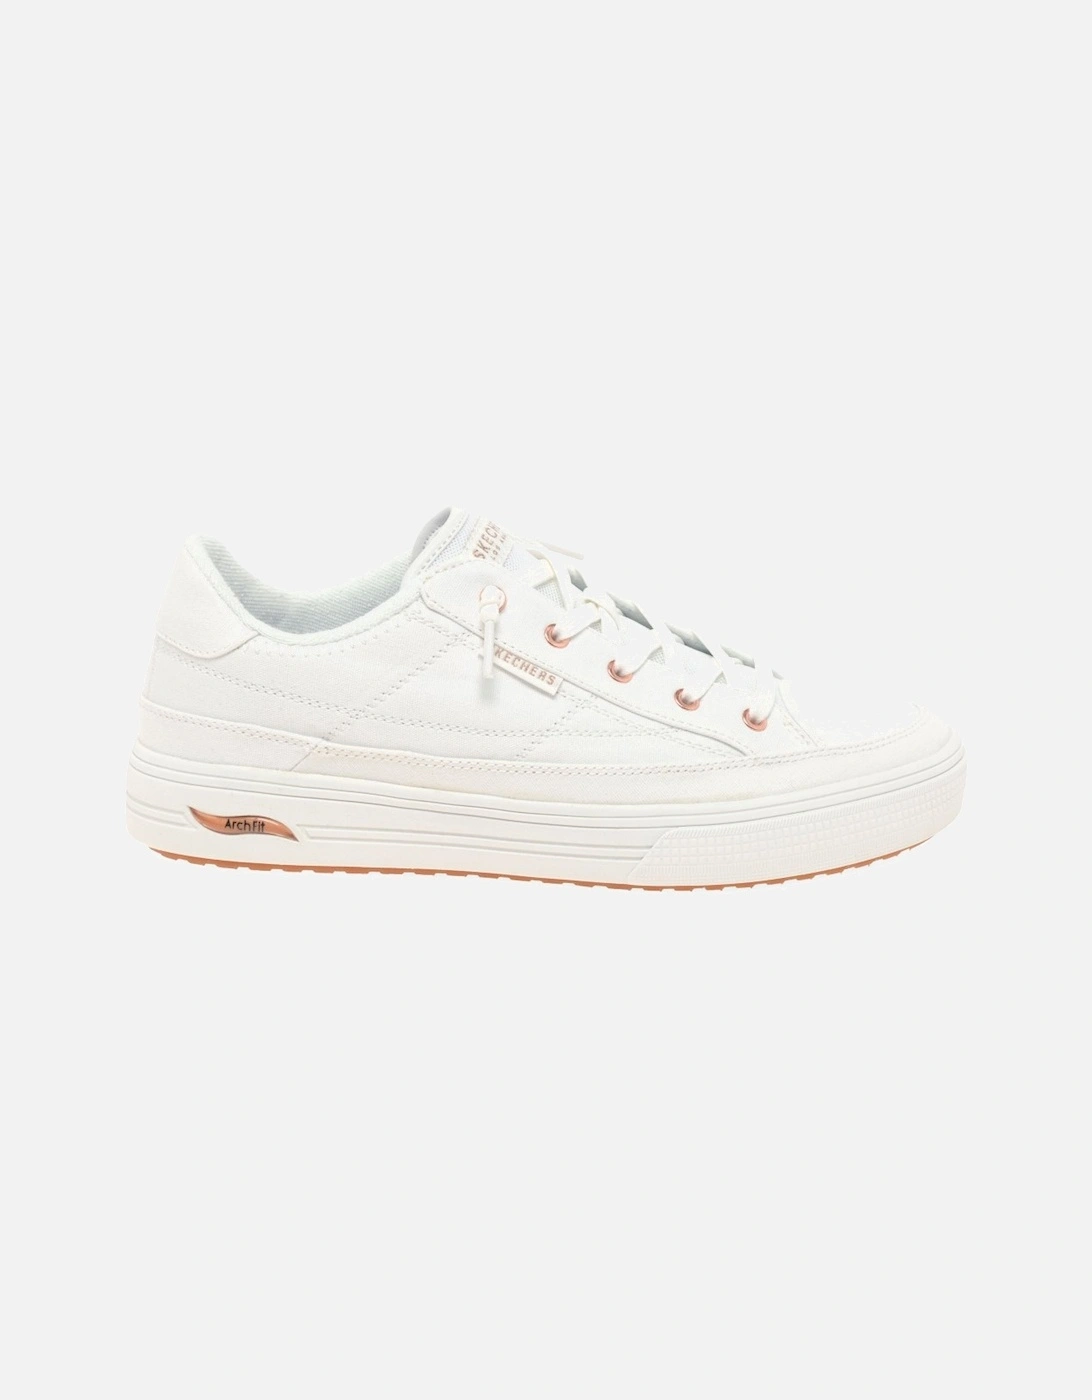 Arch Fit Arcade Womens Trainers